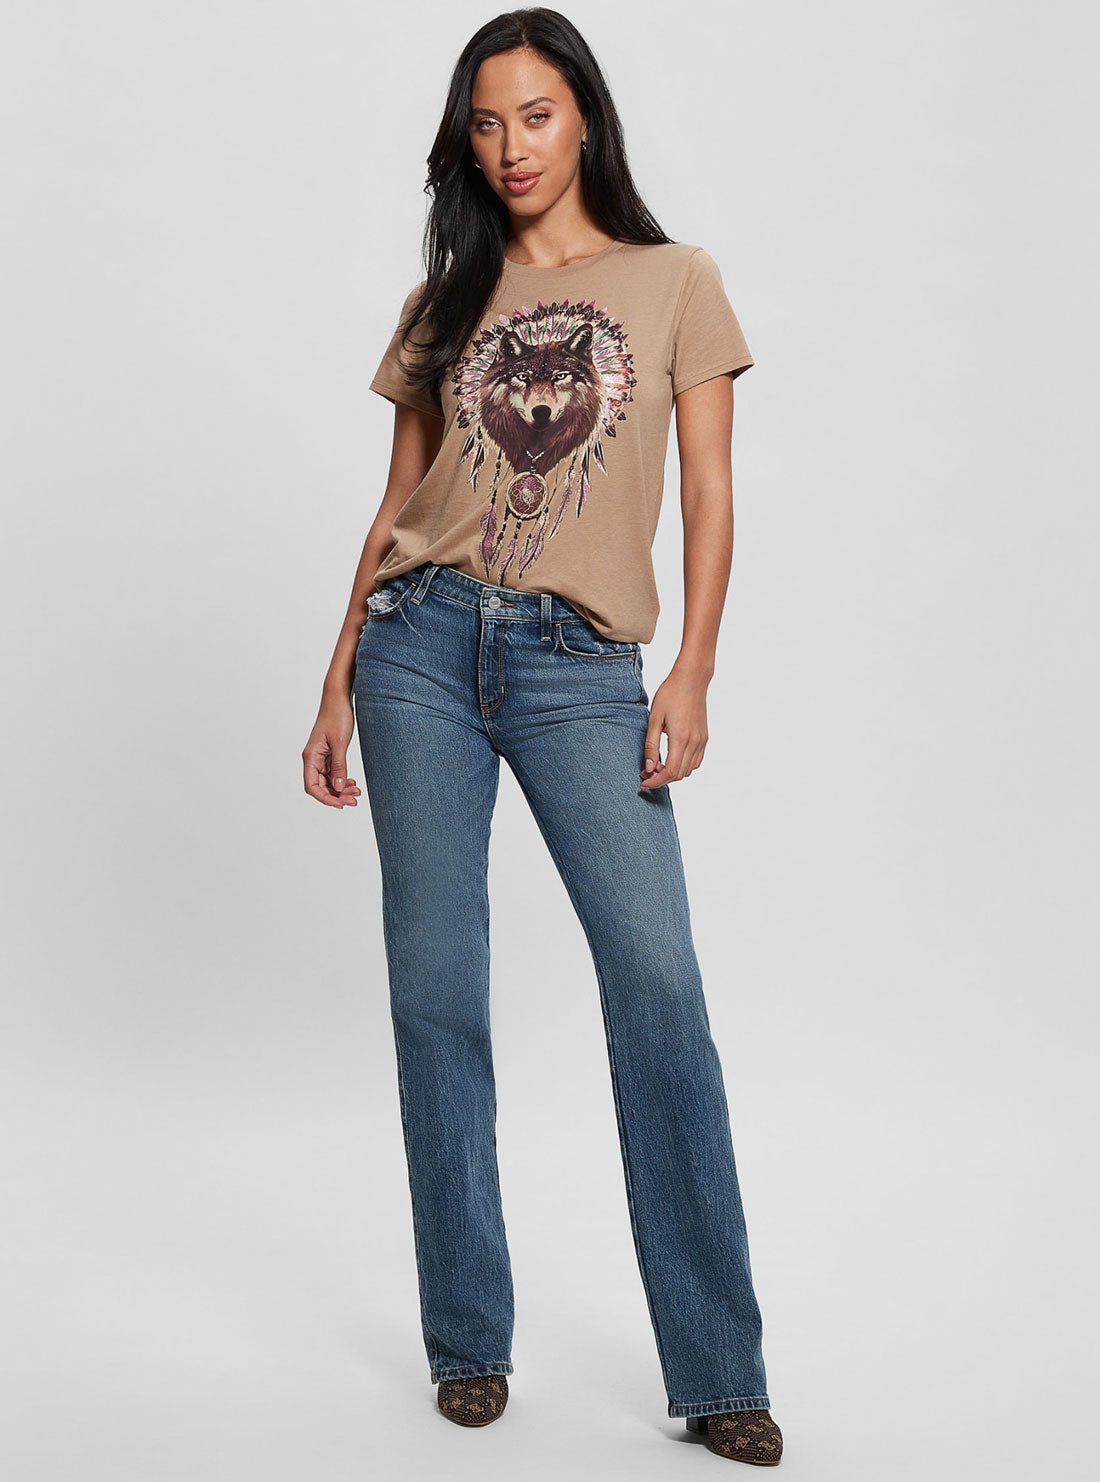 Tan Wolf Graphic T-Shirt | GUESS Women's Apparel | full view